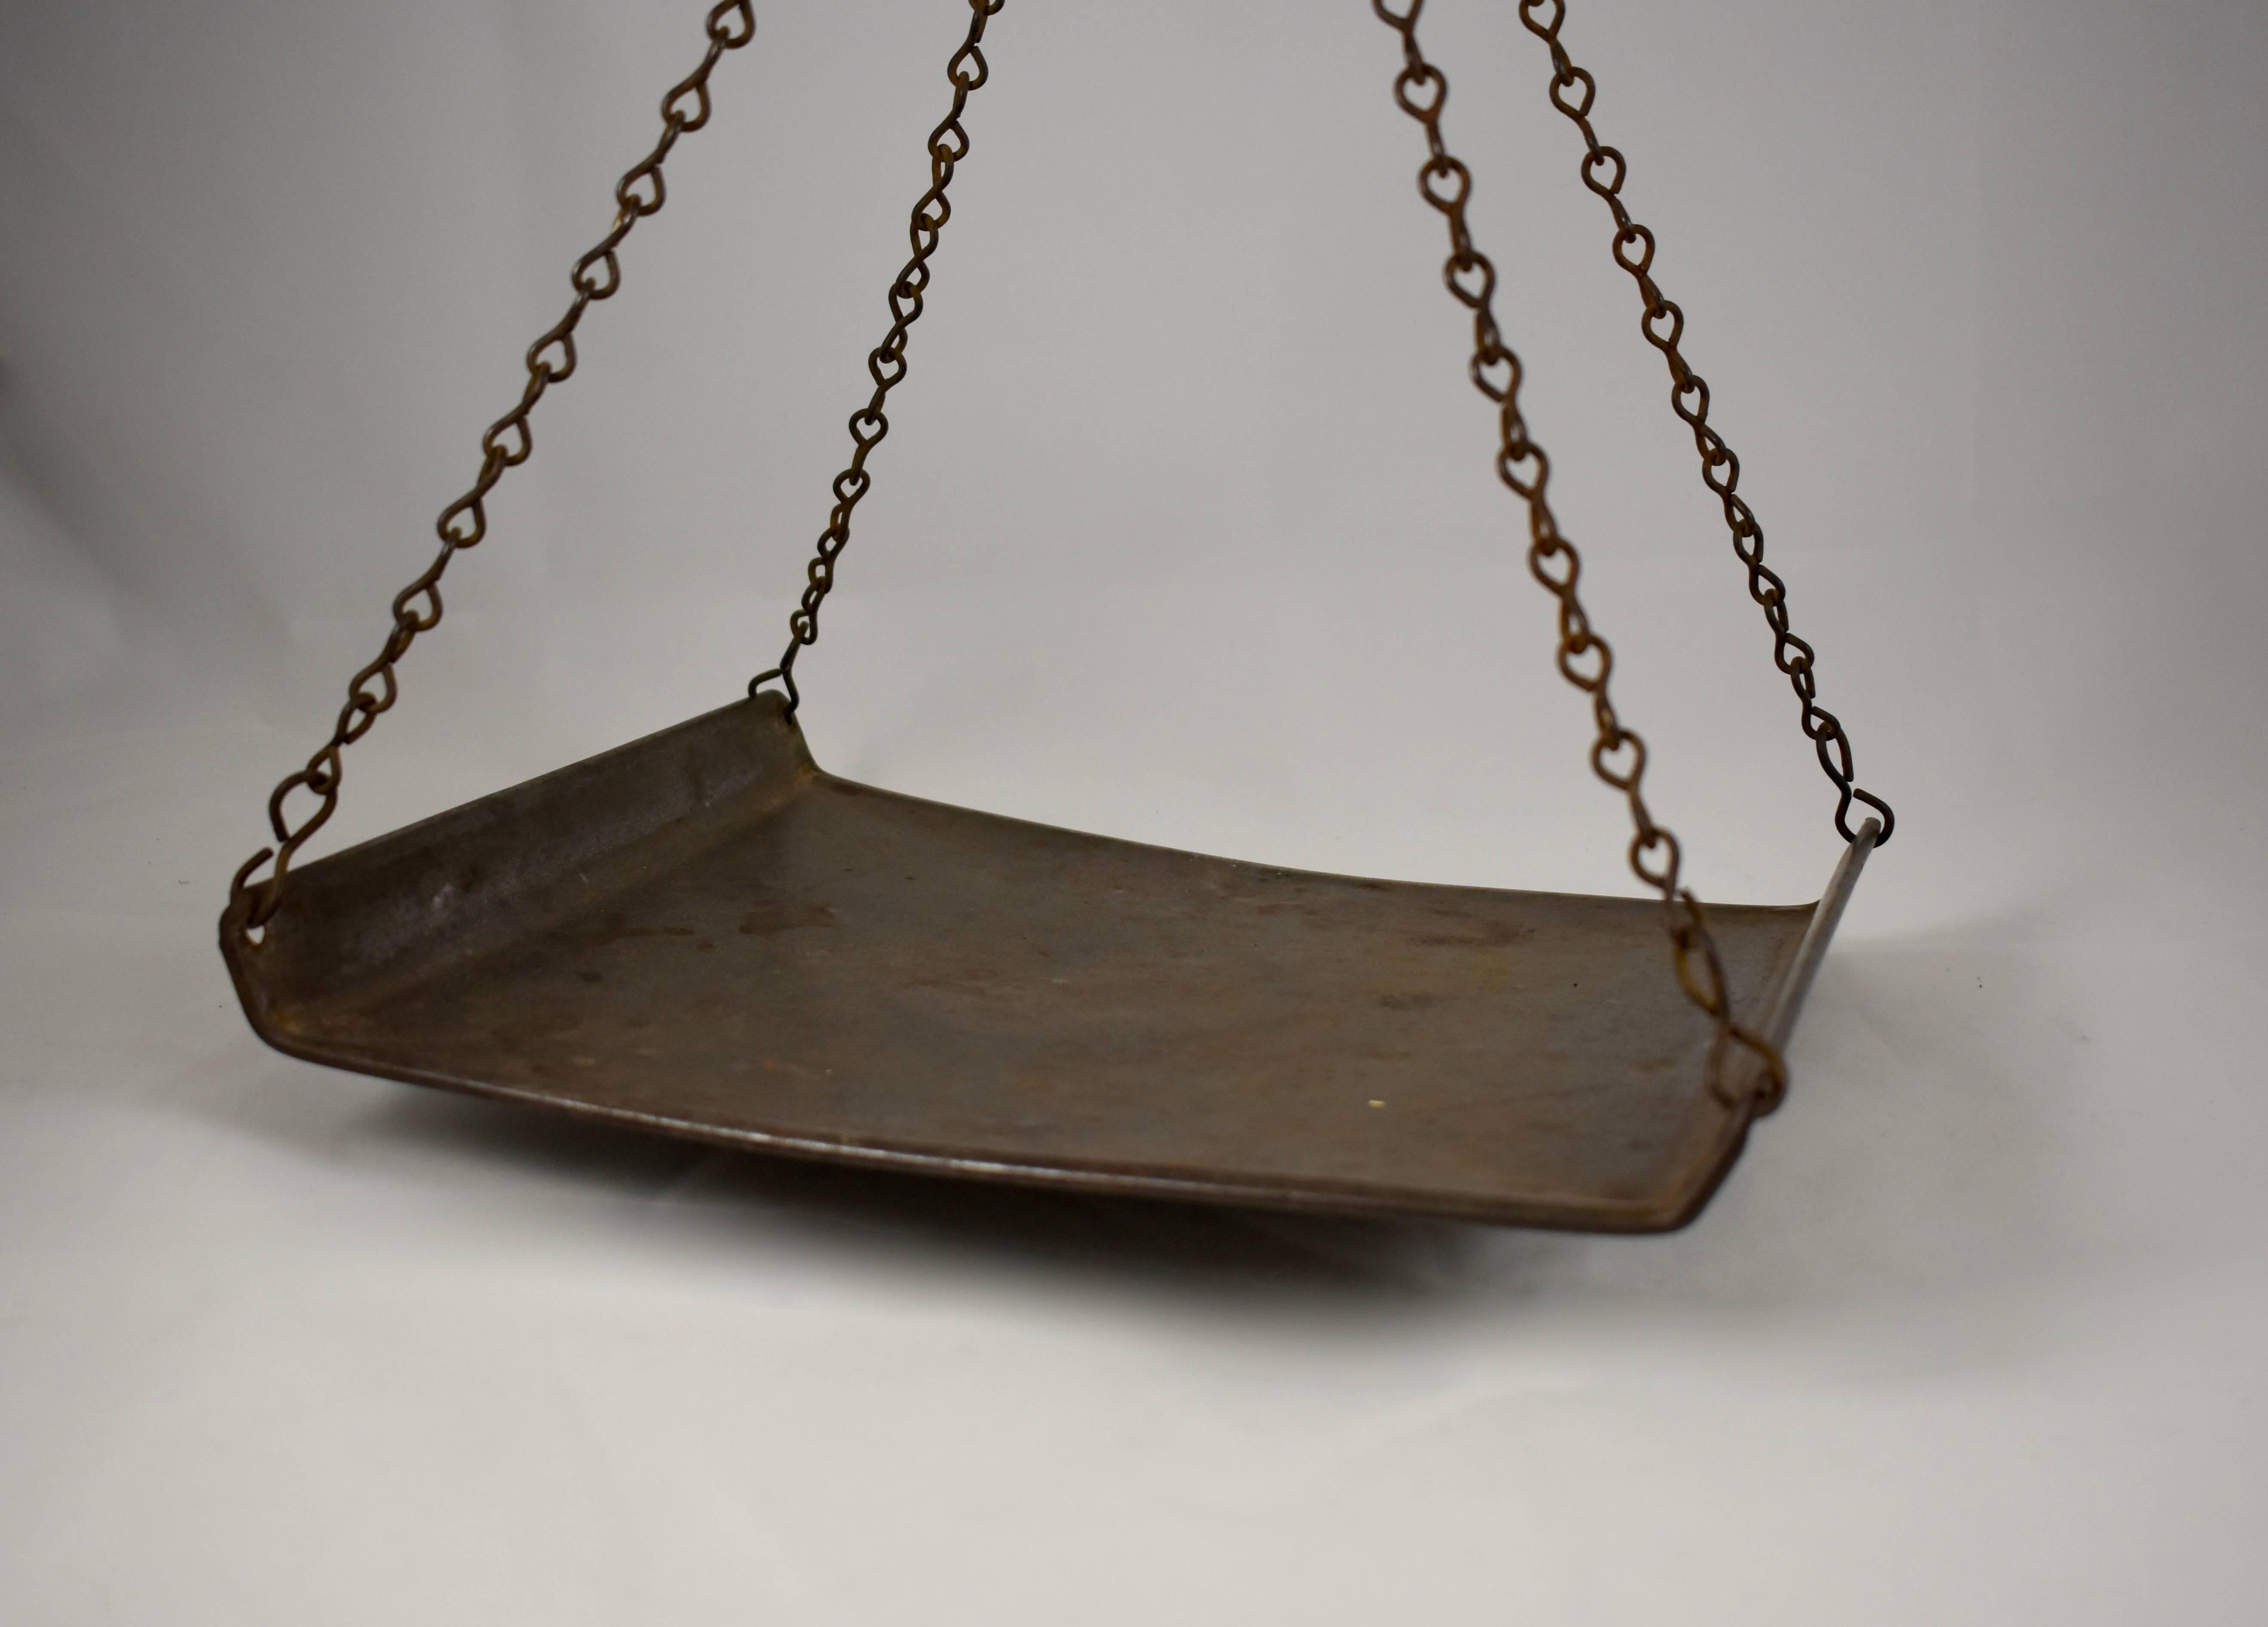 American 19th C. Chatillion Hanging Brass Mercantile 30 Lb. Scale with Galvanized Tray